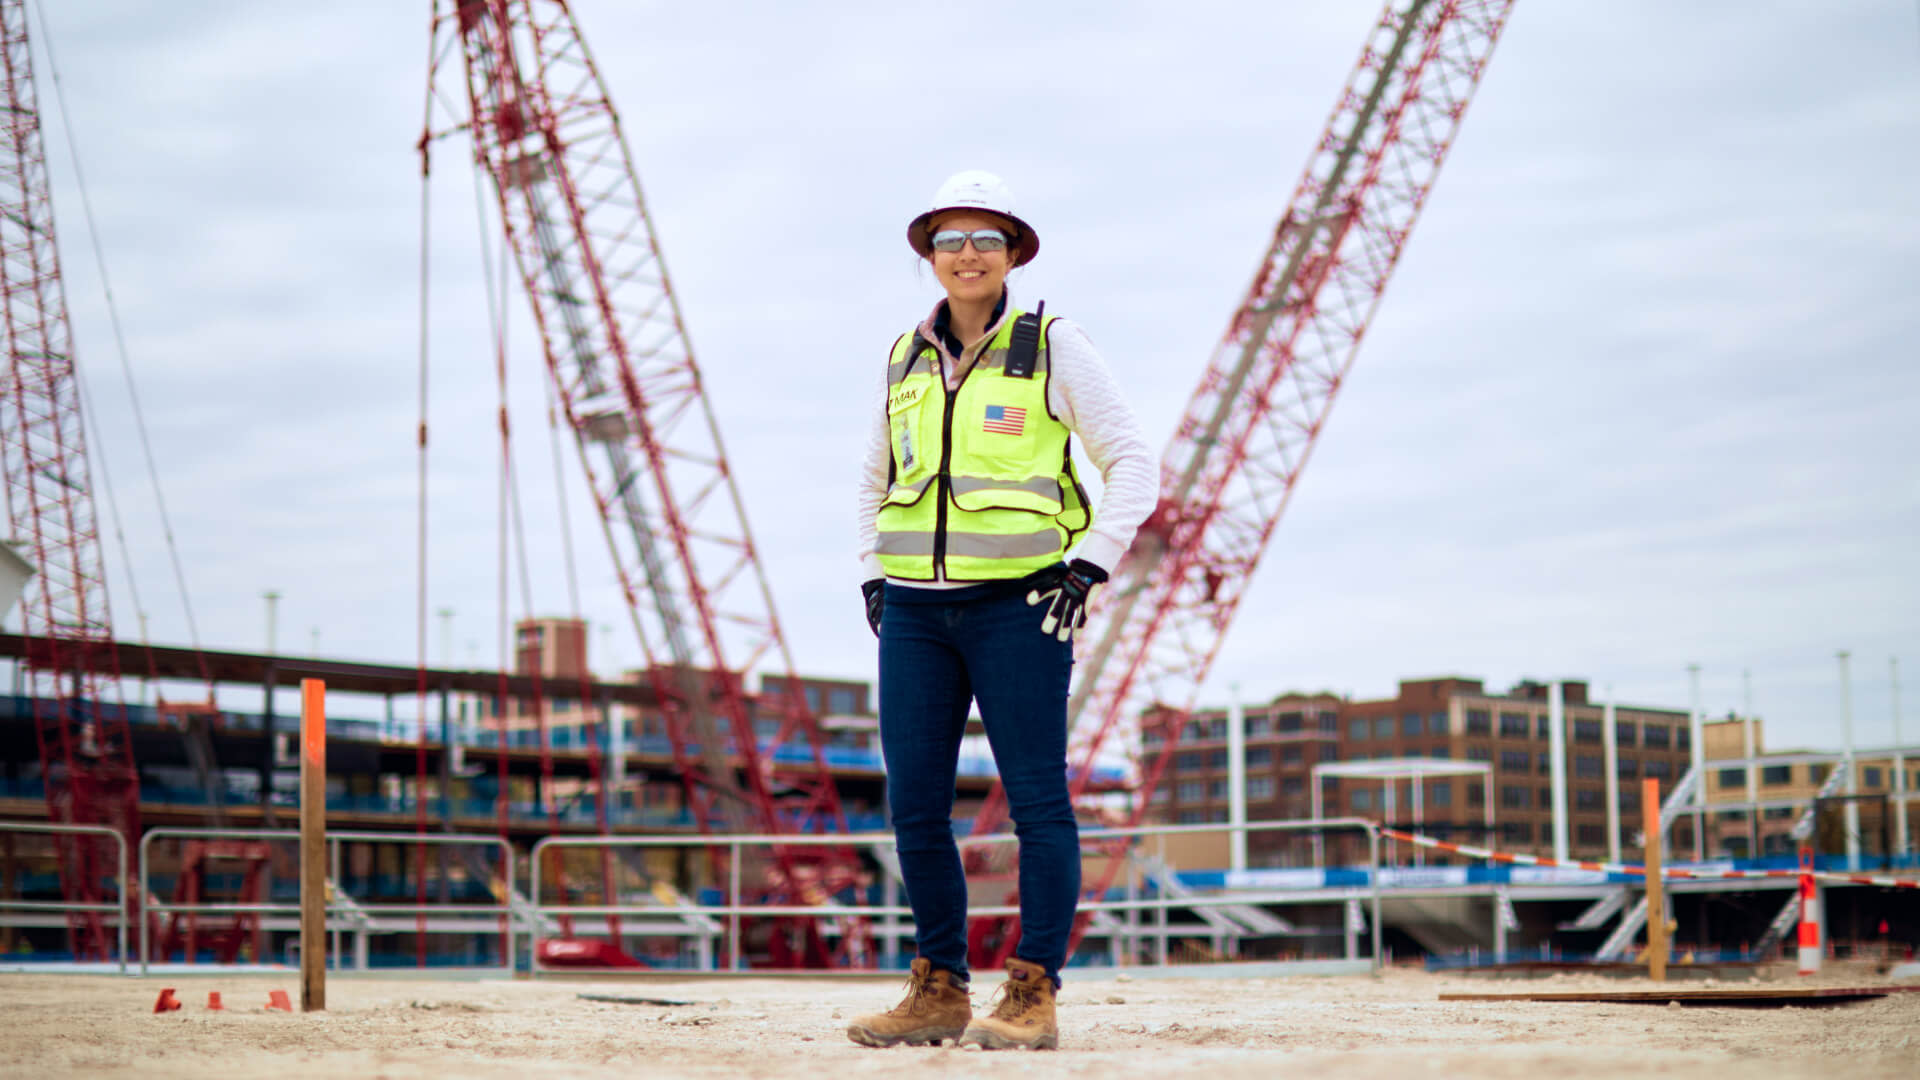 Sarah Narjes standing on a construction site